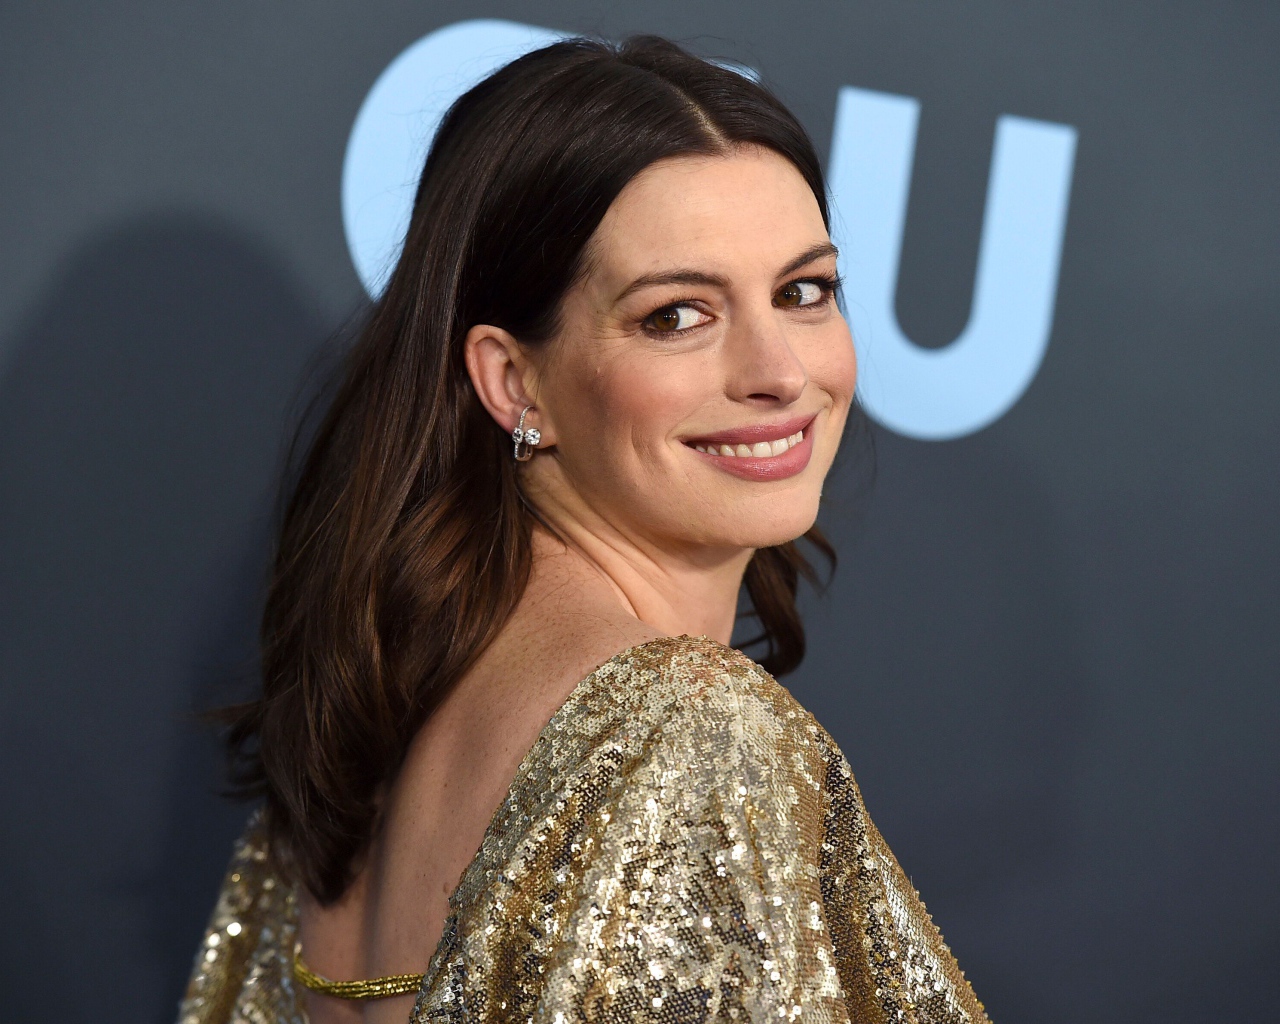 Smiling actress Anne Hathaway in a bright dress